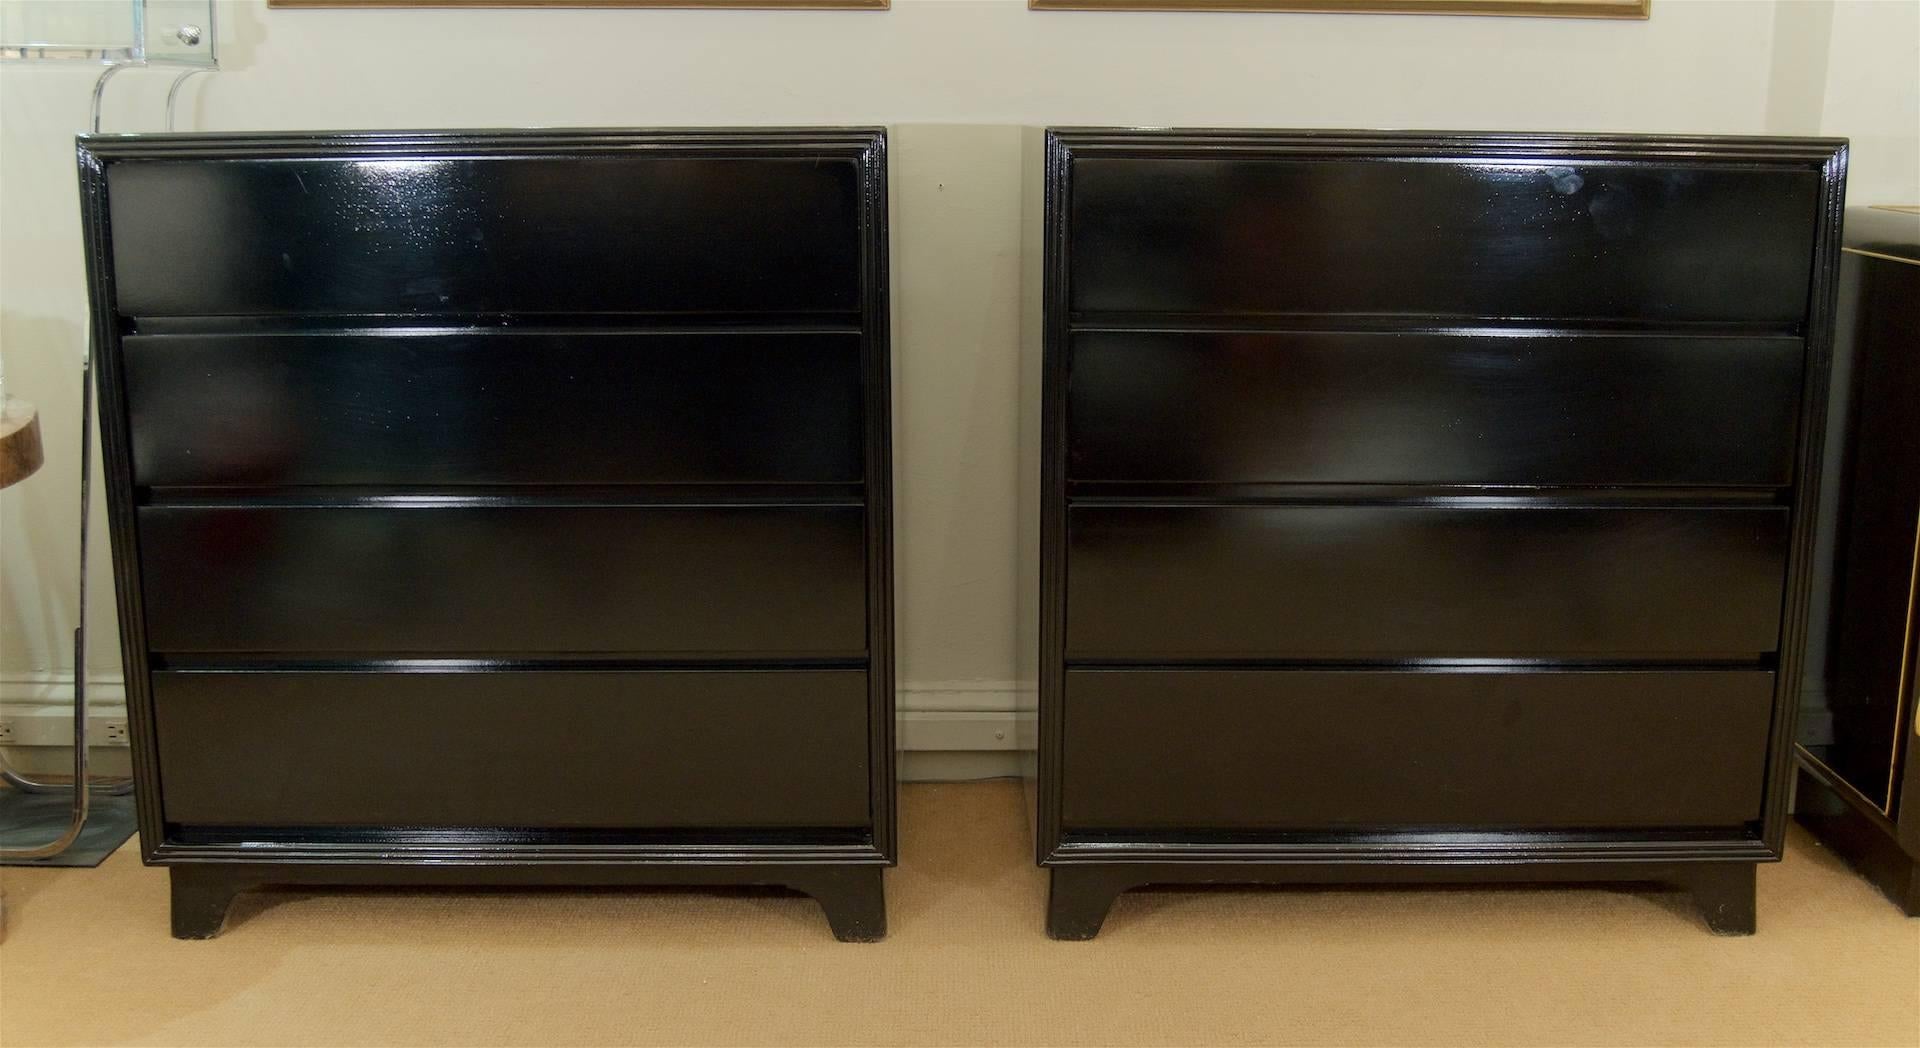 Well-sized pair of bachelor's chests or bedside end tables, each with four drawers (recessed finger pulls on underside of drawer fronts. The gloss black lacquer emphasizes the clean lines and proportions, with a minimal border mold on the face of